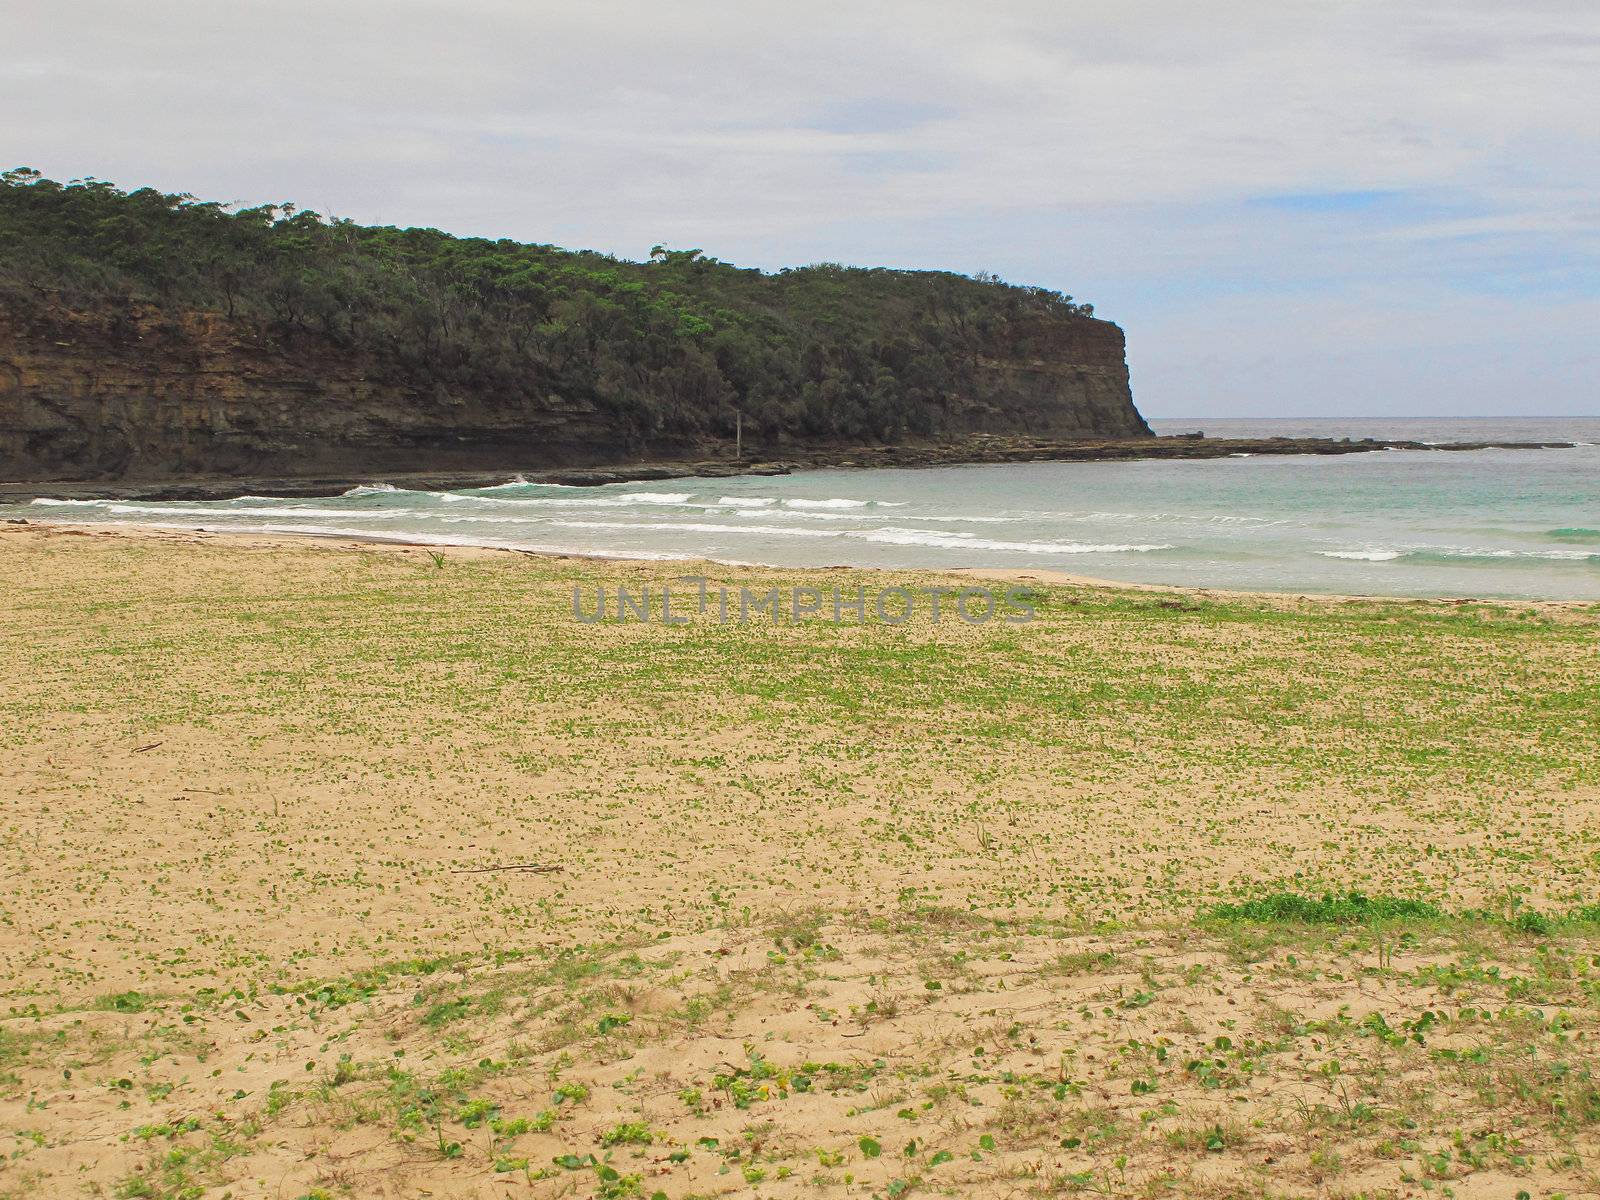 natural beach in australia with vegetation on the sand and trees in the background